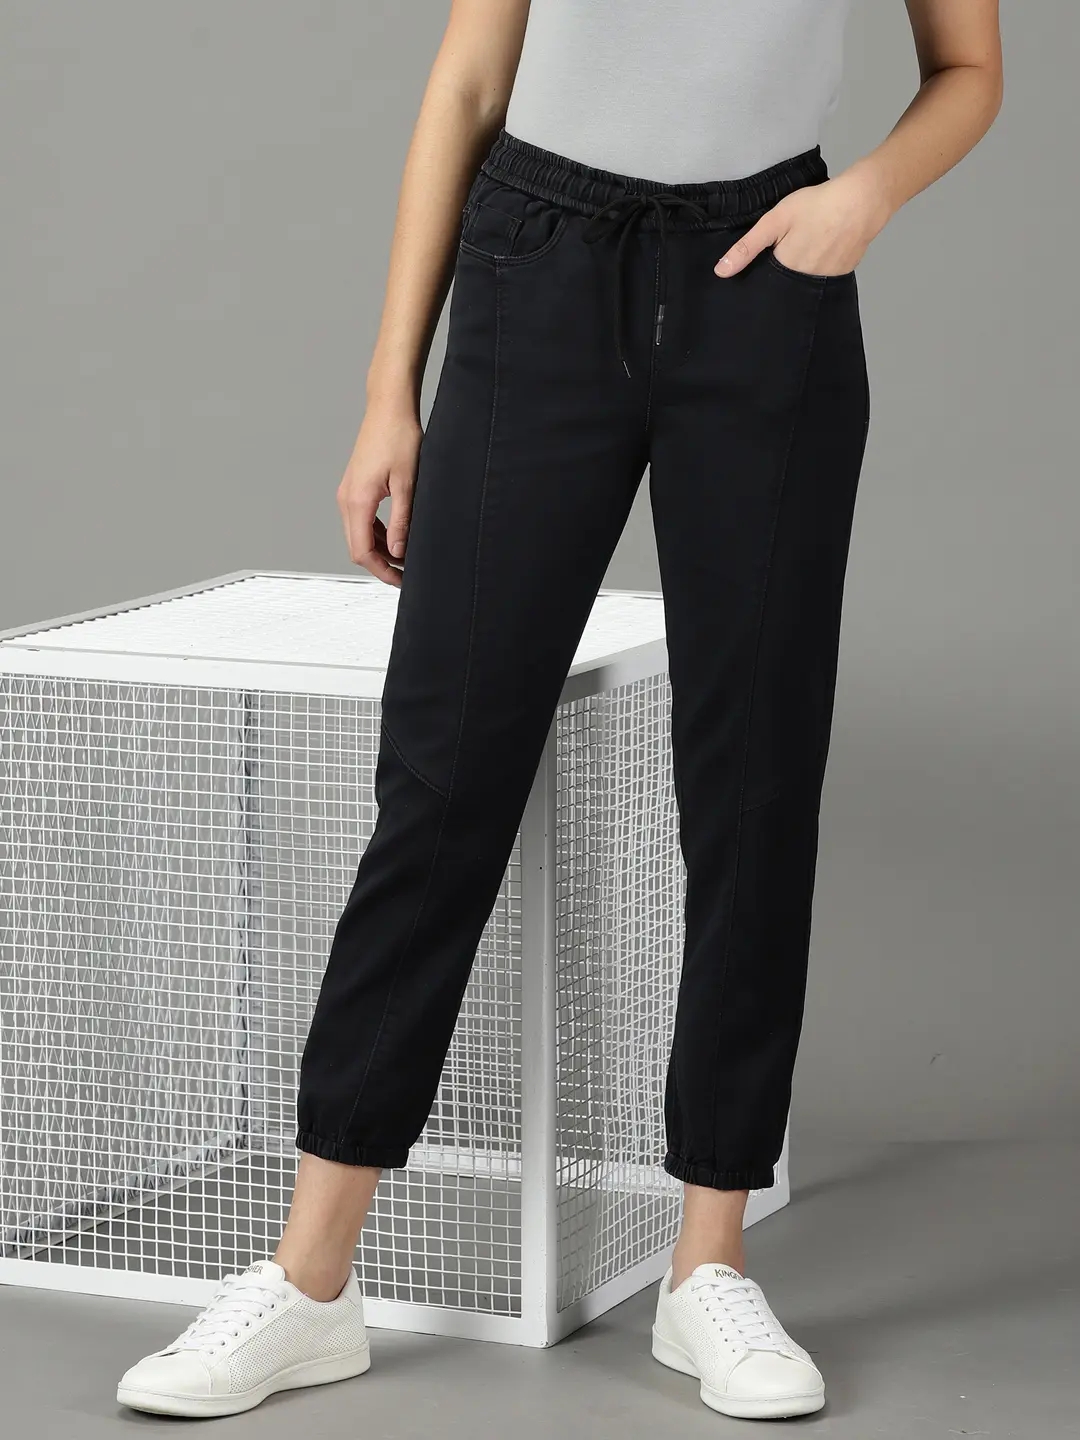 SHOWOFF Women's Stretchable Clean Look Black Jogger Jeans